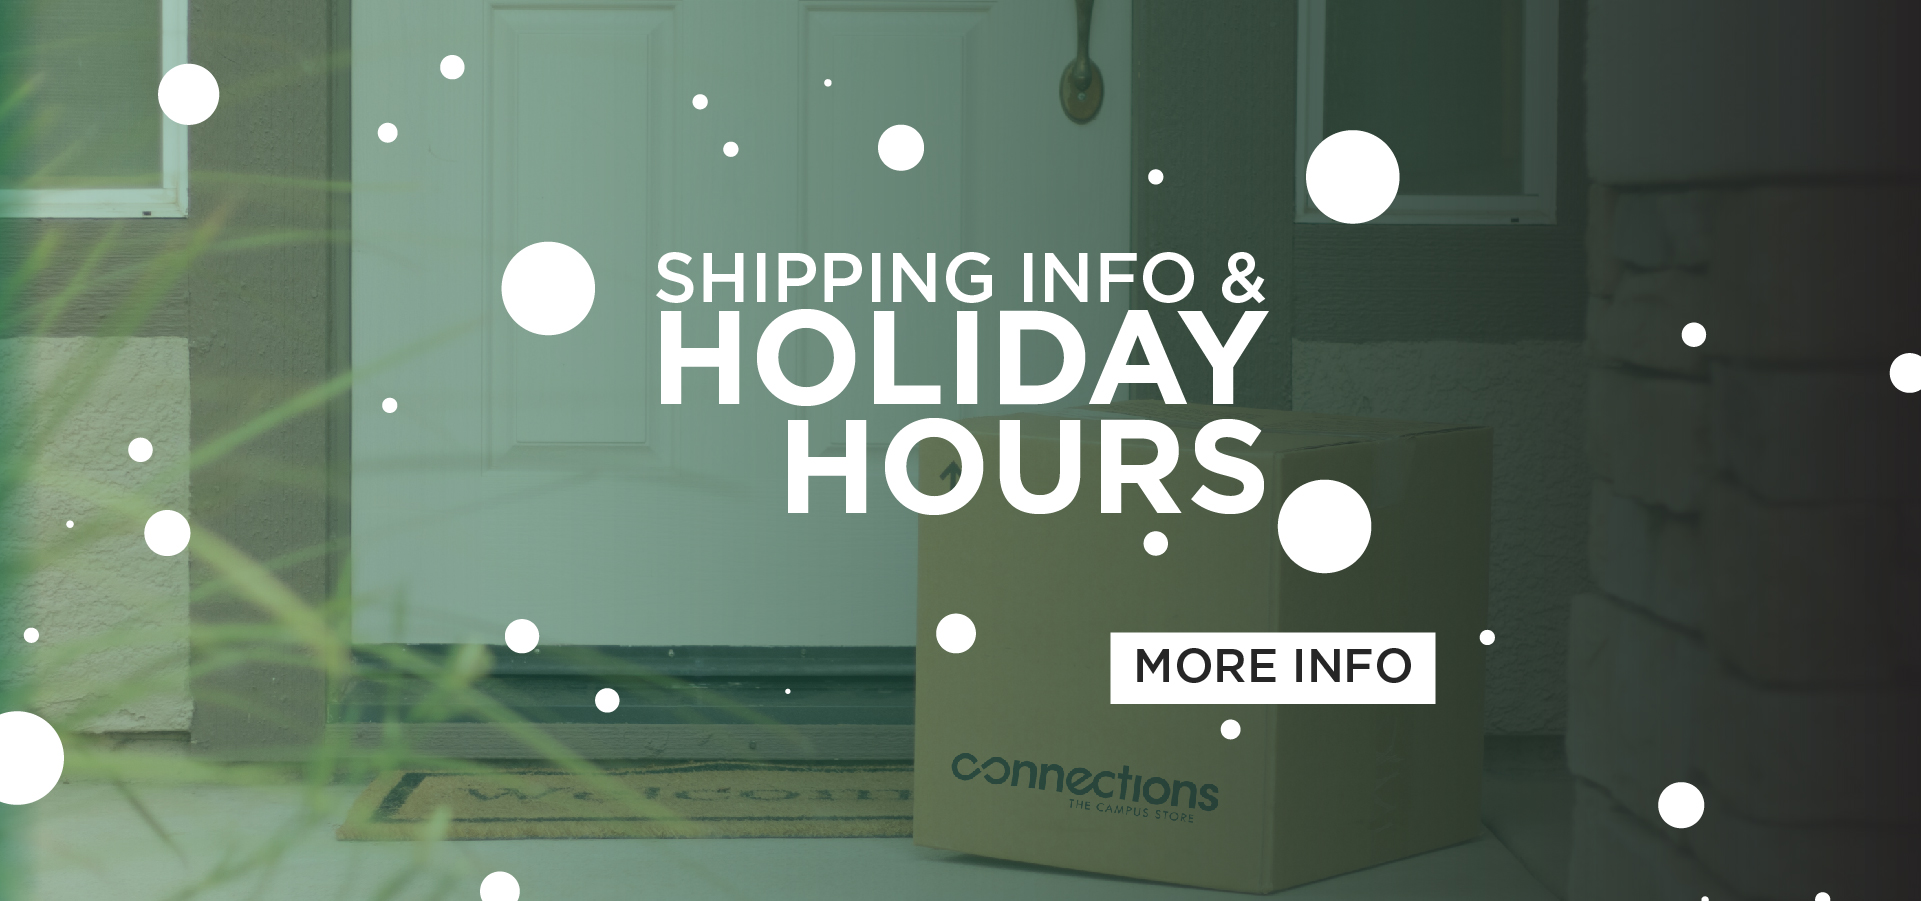 Shipping Info & Holiday Hours.More Info ->